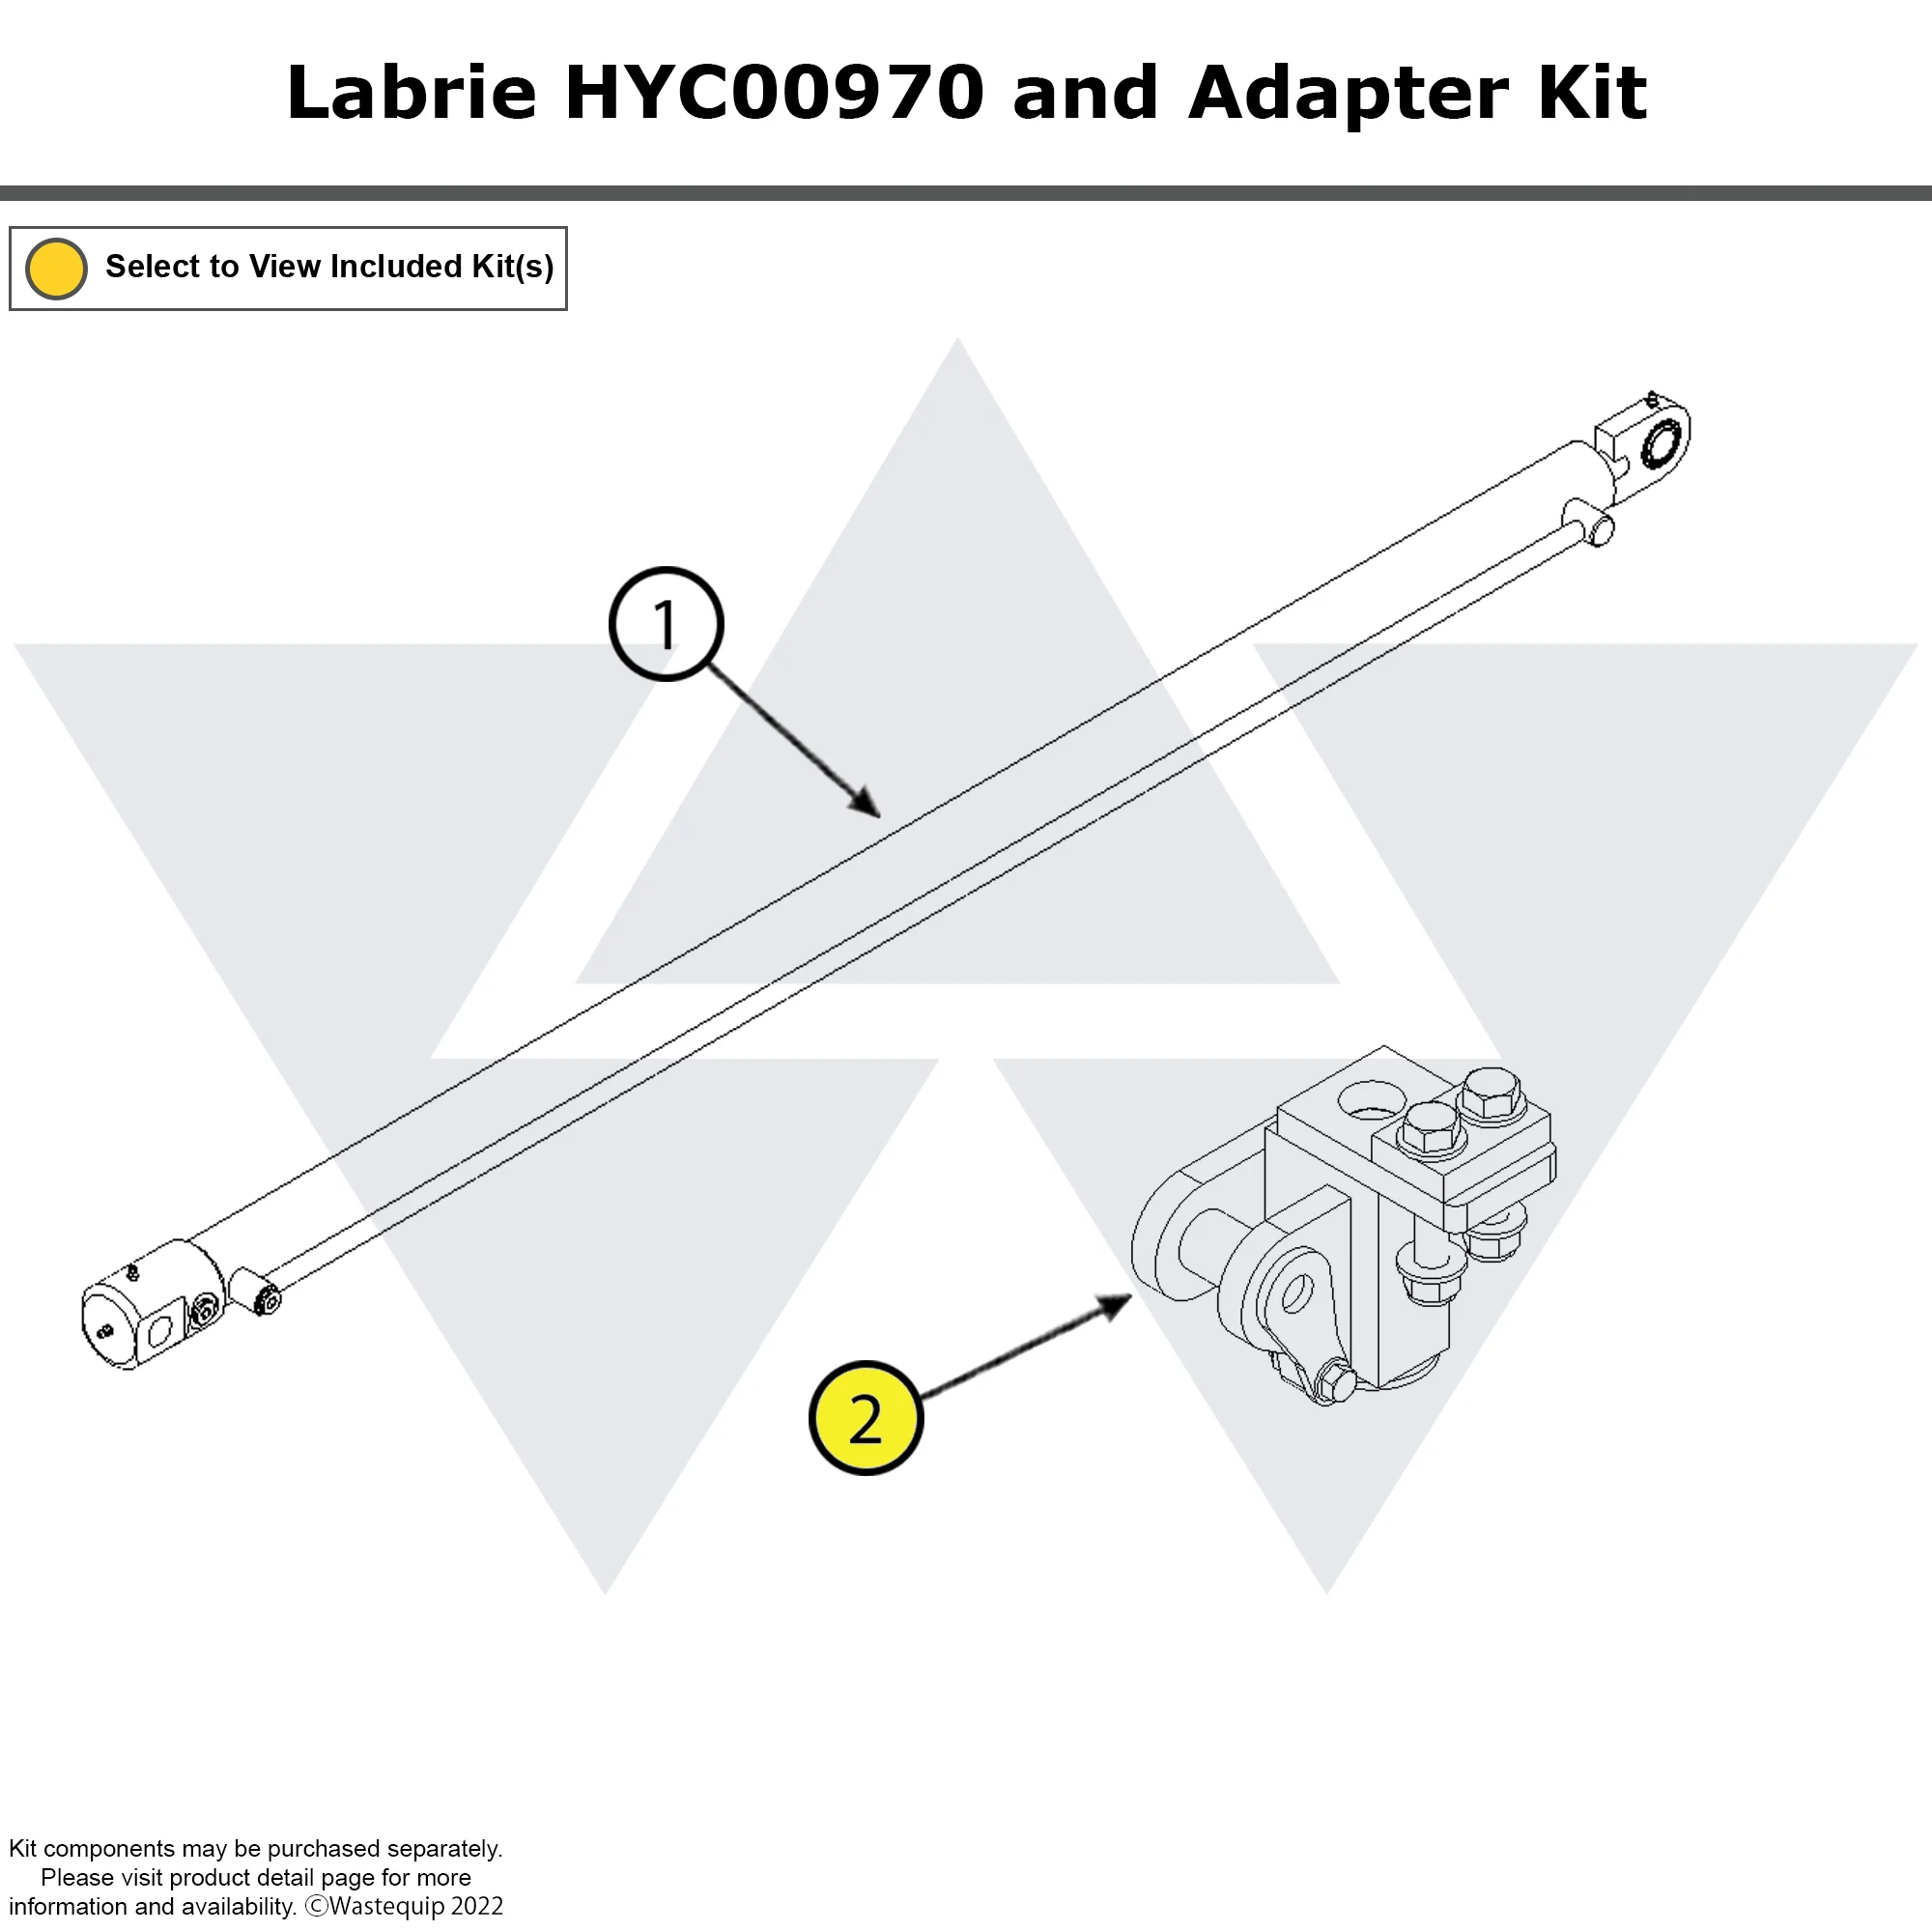 Wastebuilt® Replacement for Labrie HYC00970 and Adapter Kit